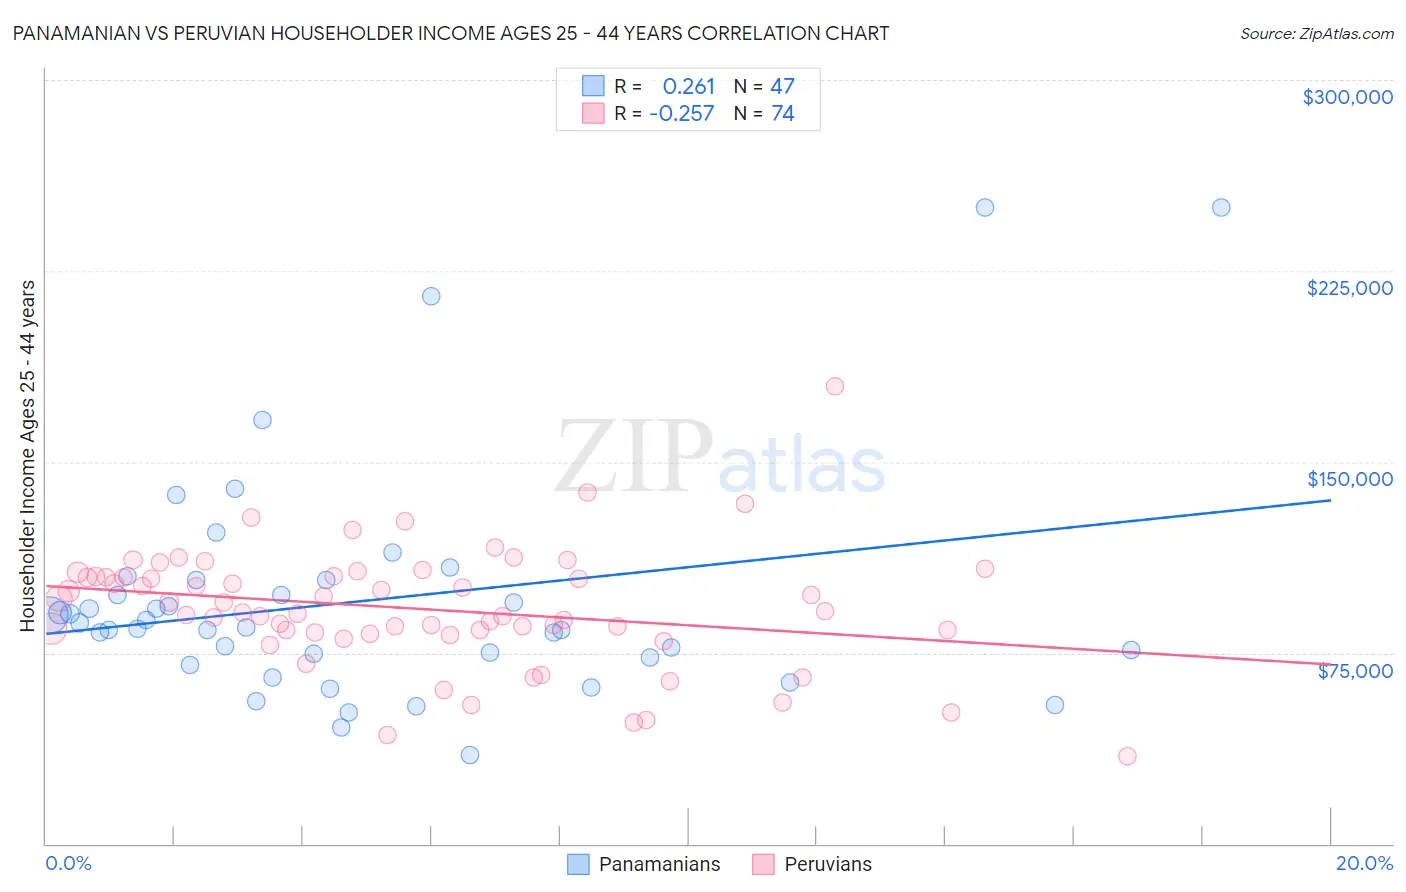 Panamanian vs Peruvian Householder Income Ages 25 - 44 years